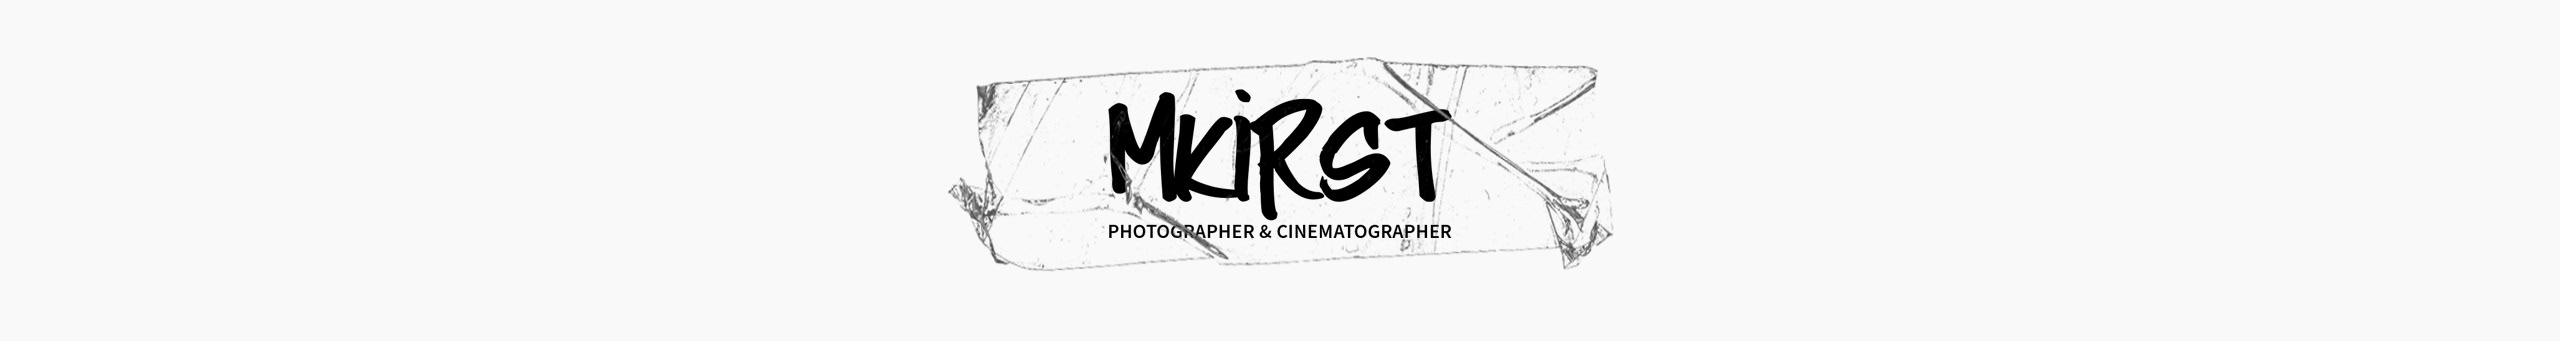 Max Kirst's profile banner